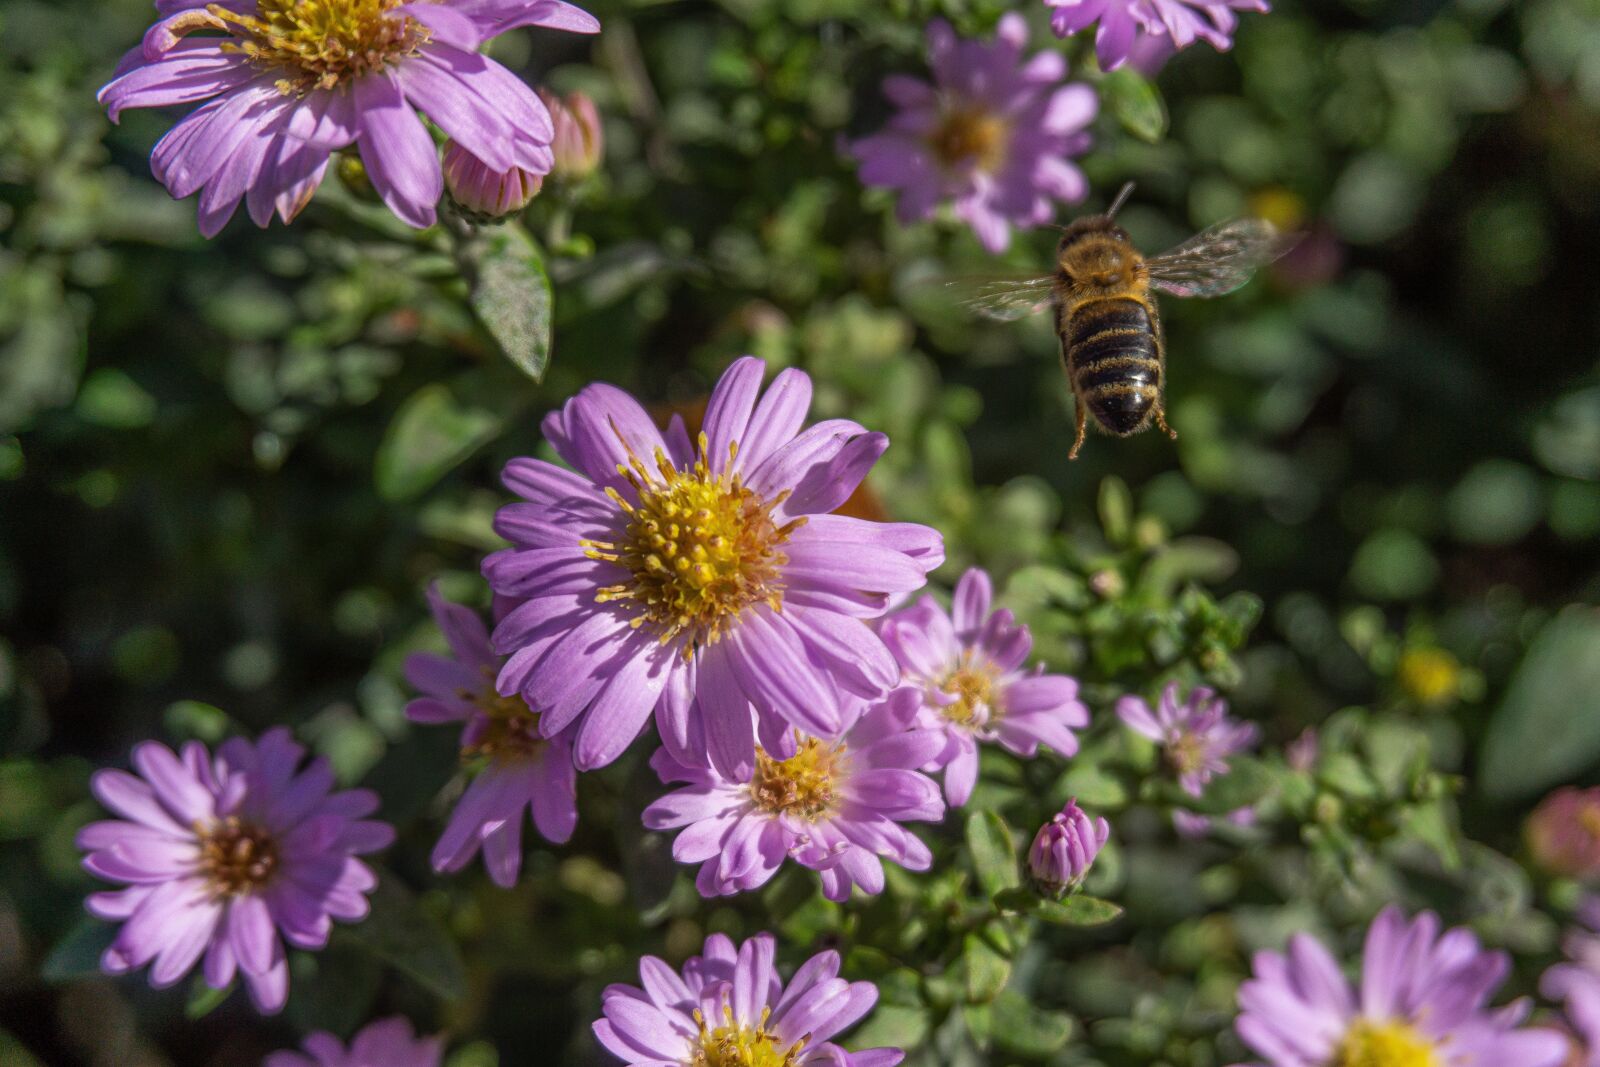 Sony a5100 sample photo. Blossoming flower, pink aster photography